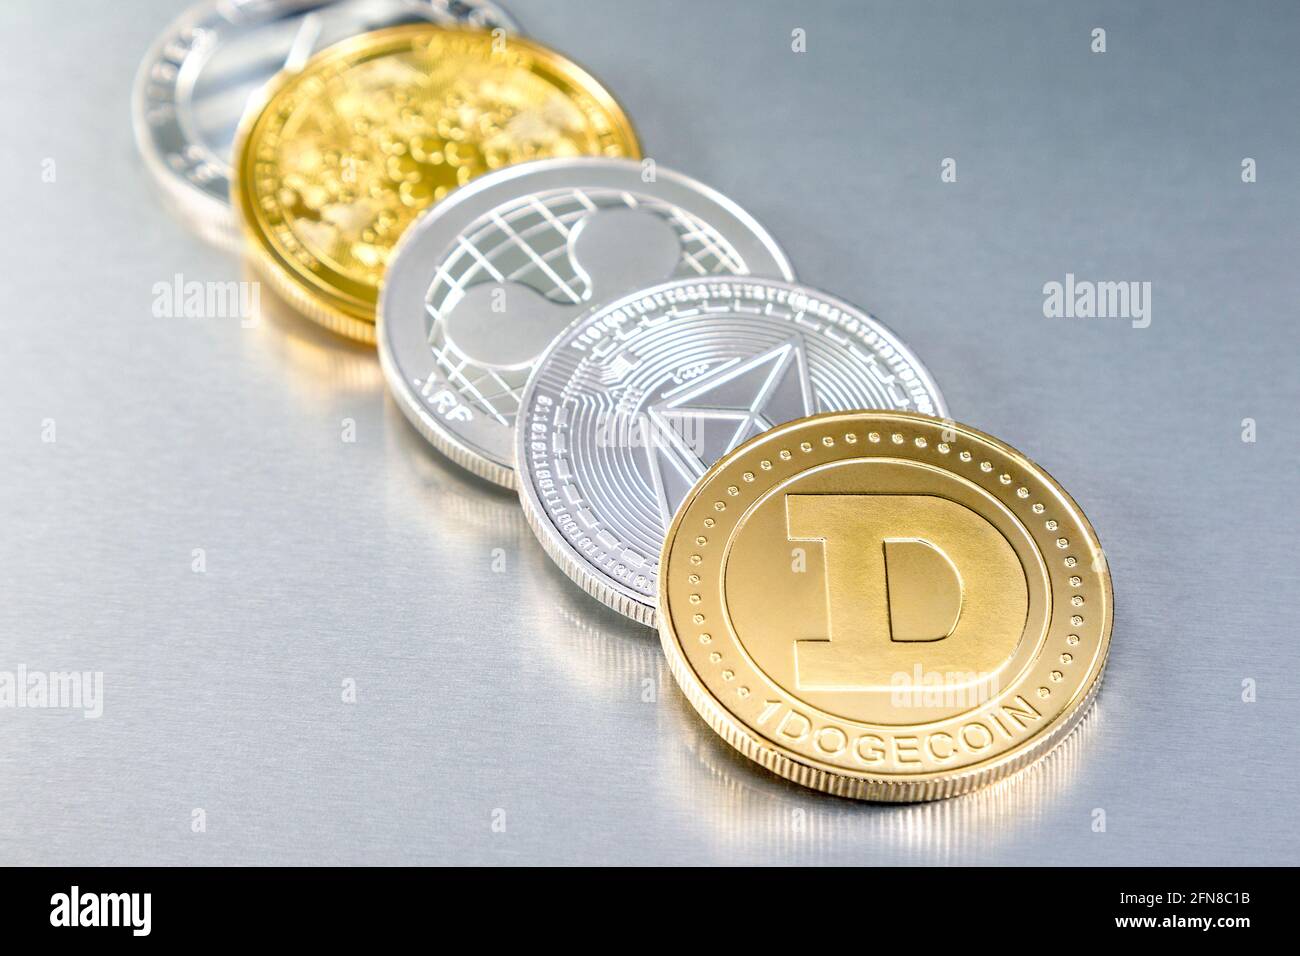 Selection of cryptocurrency token alt coins including ethereum classic, dogecoin, ripple, cardano and litecoin Stock Photo